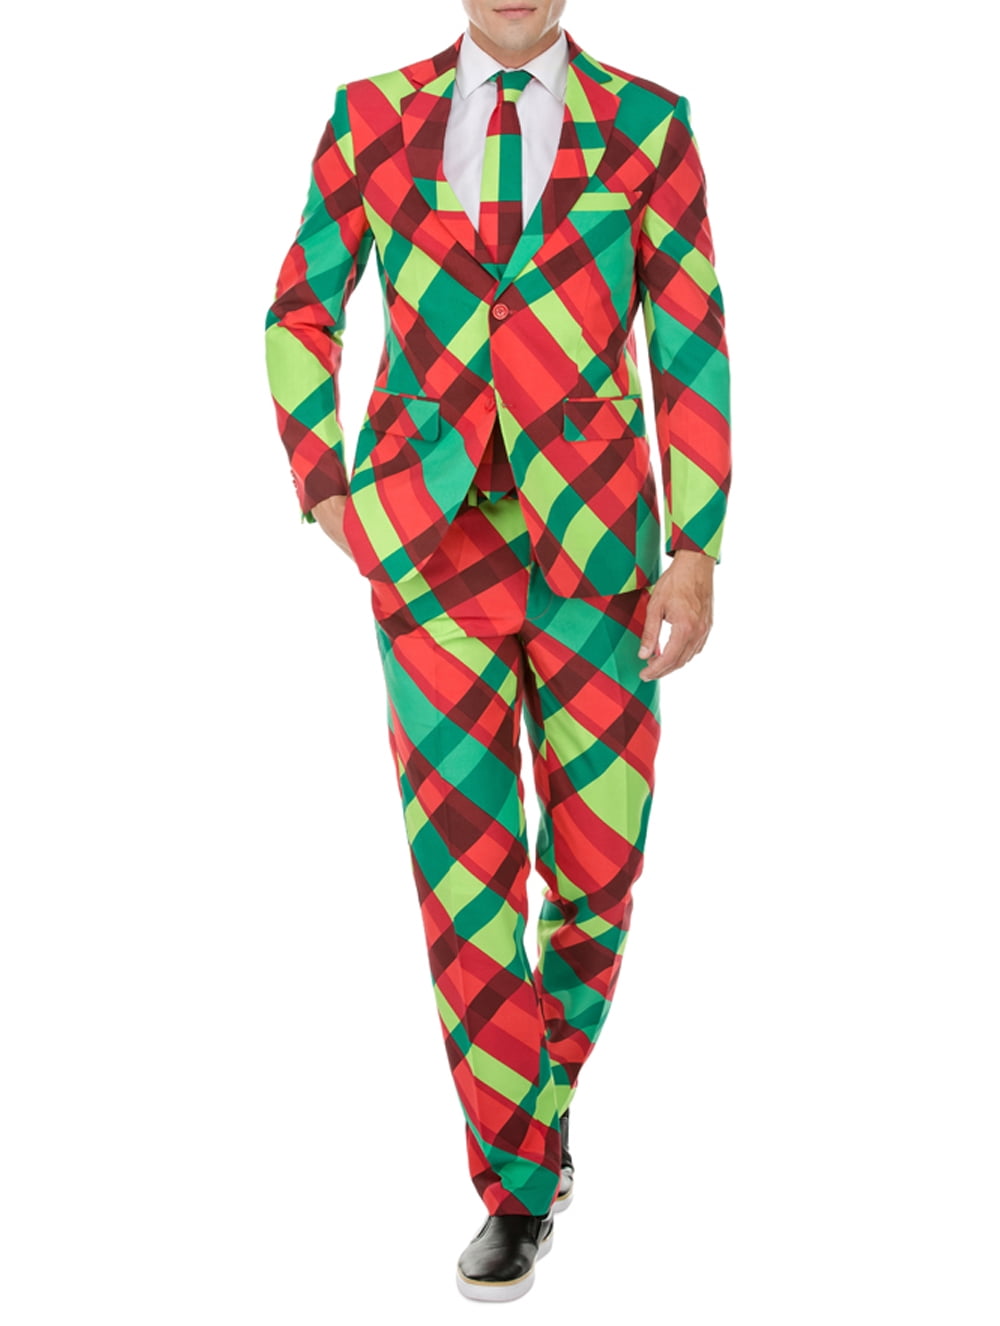 Braveman Men's Classic Fit Ugly Christmas Suits with Matching Tie - Walmart.com